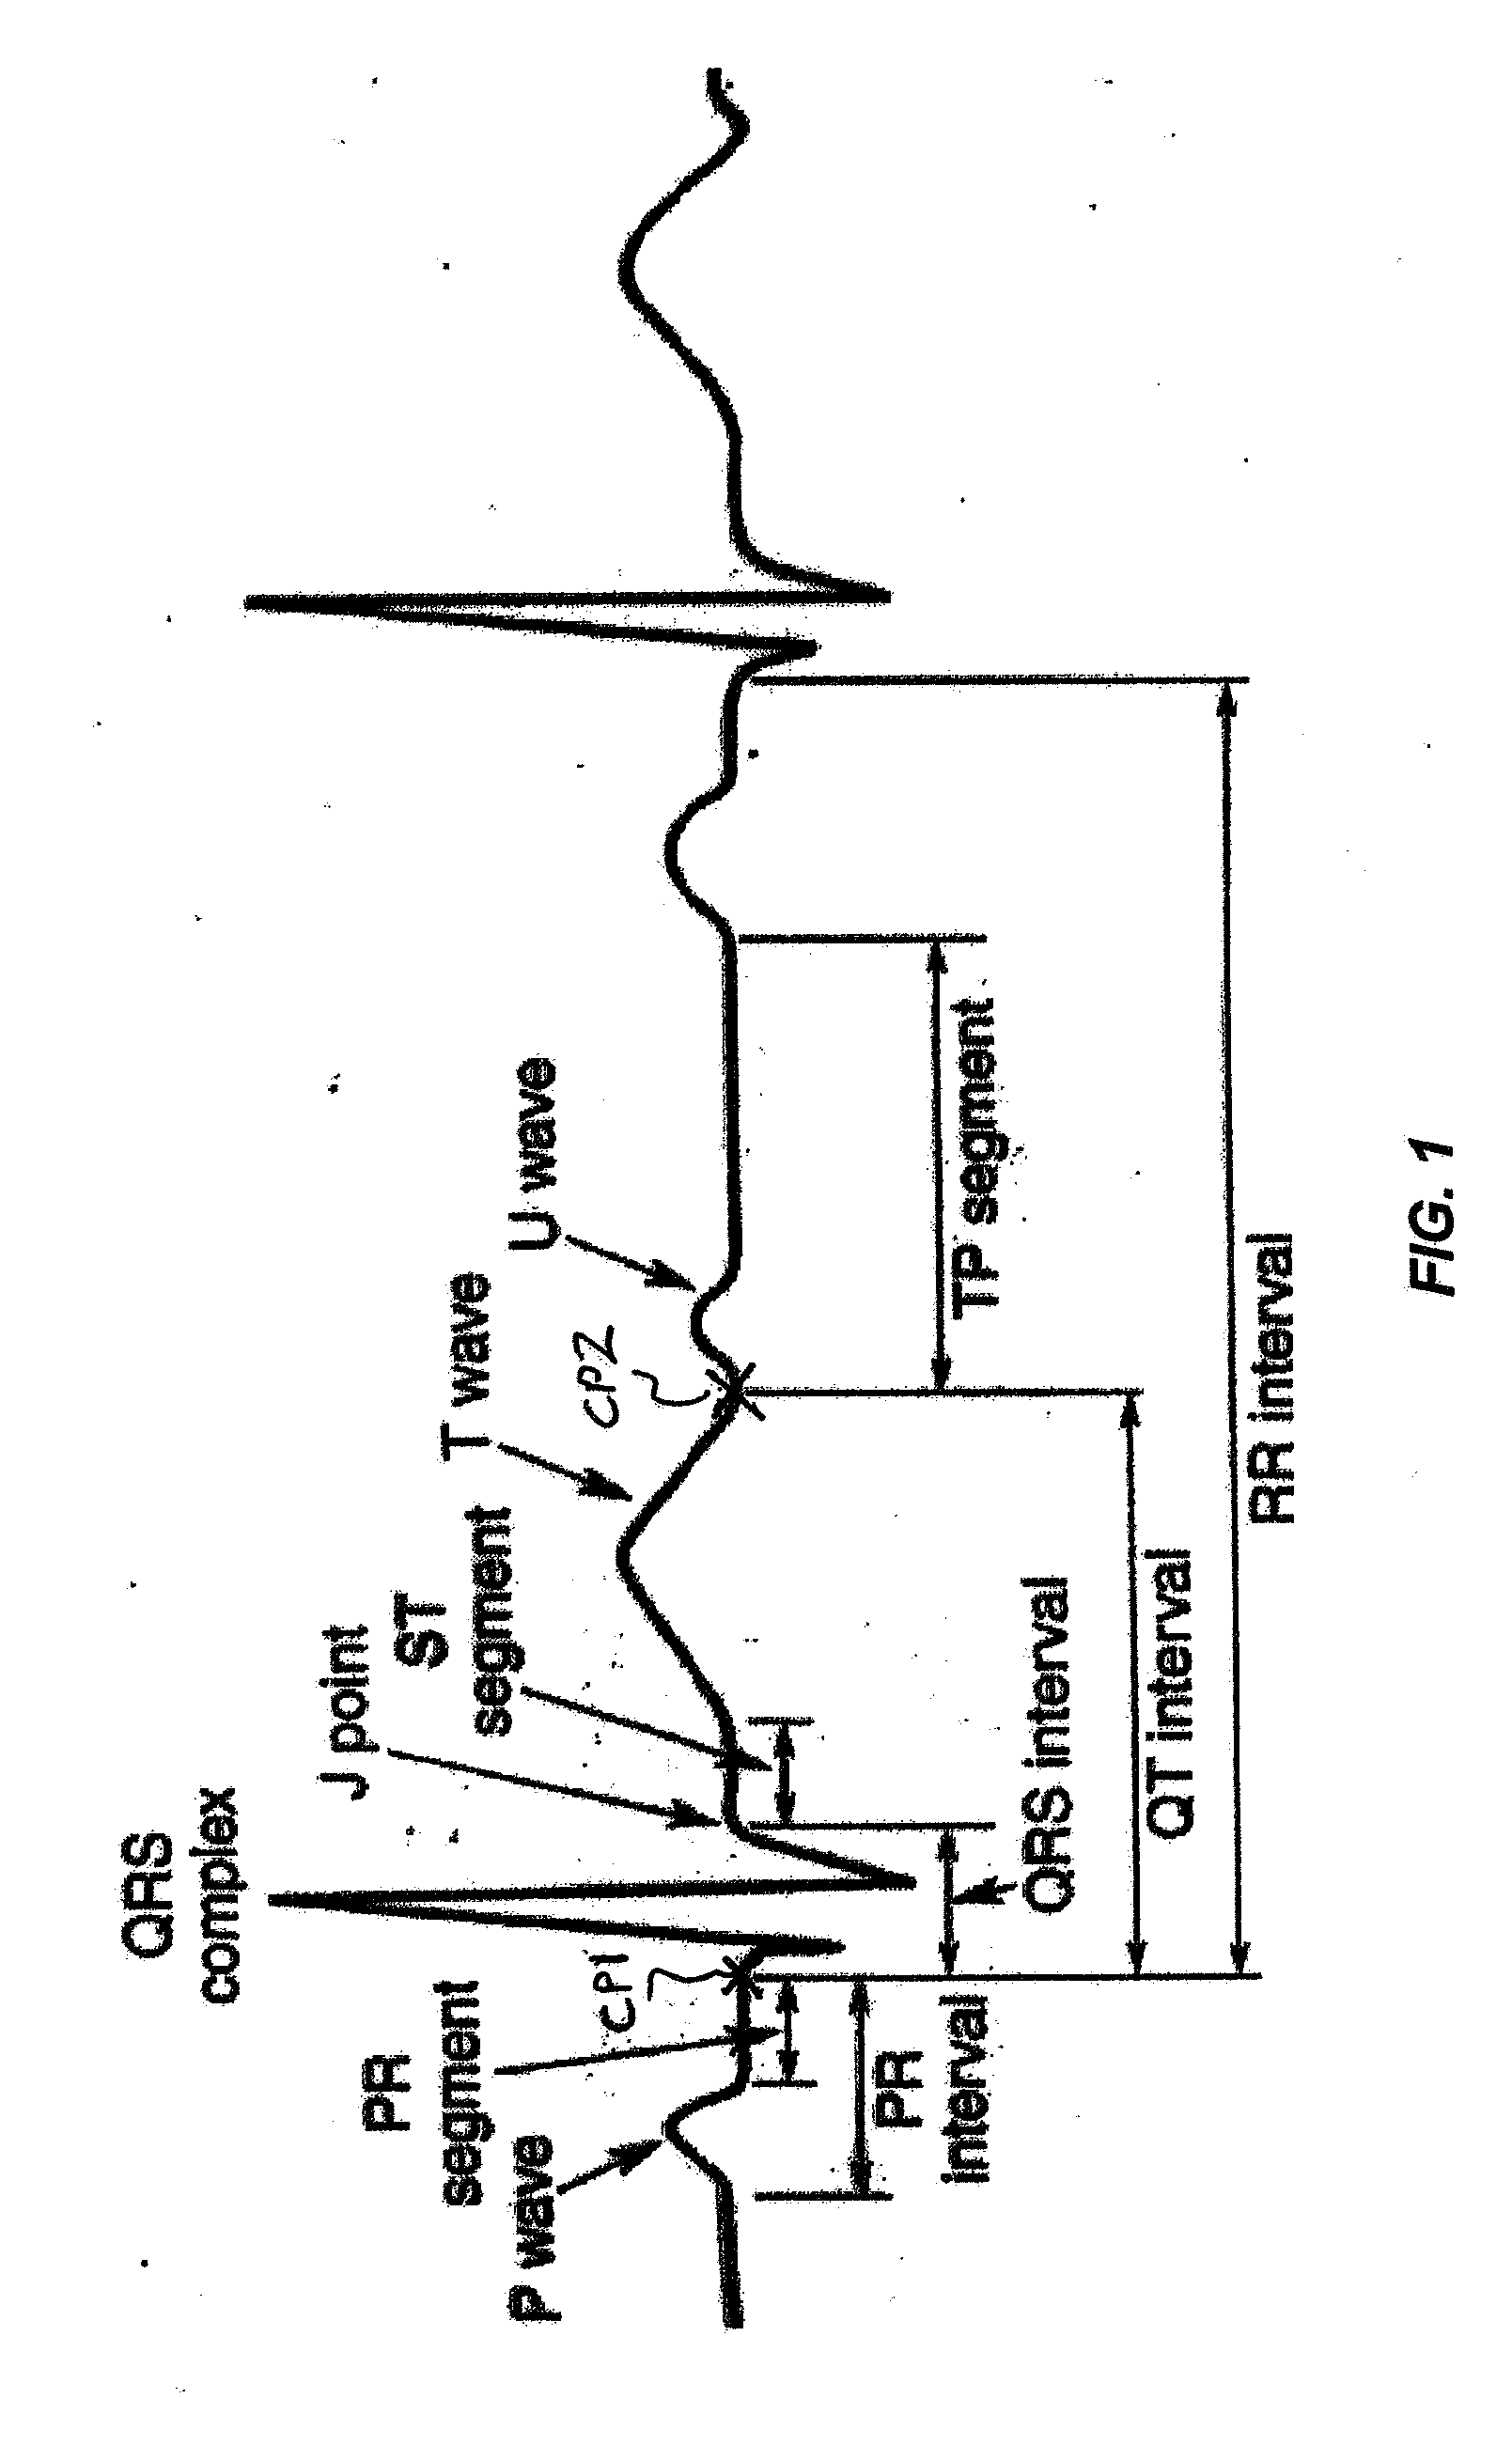 Method and apparatus for rapid interpretive analysis of electrocardiographic waveforms